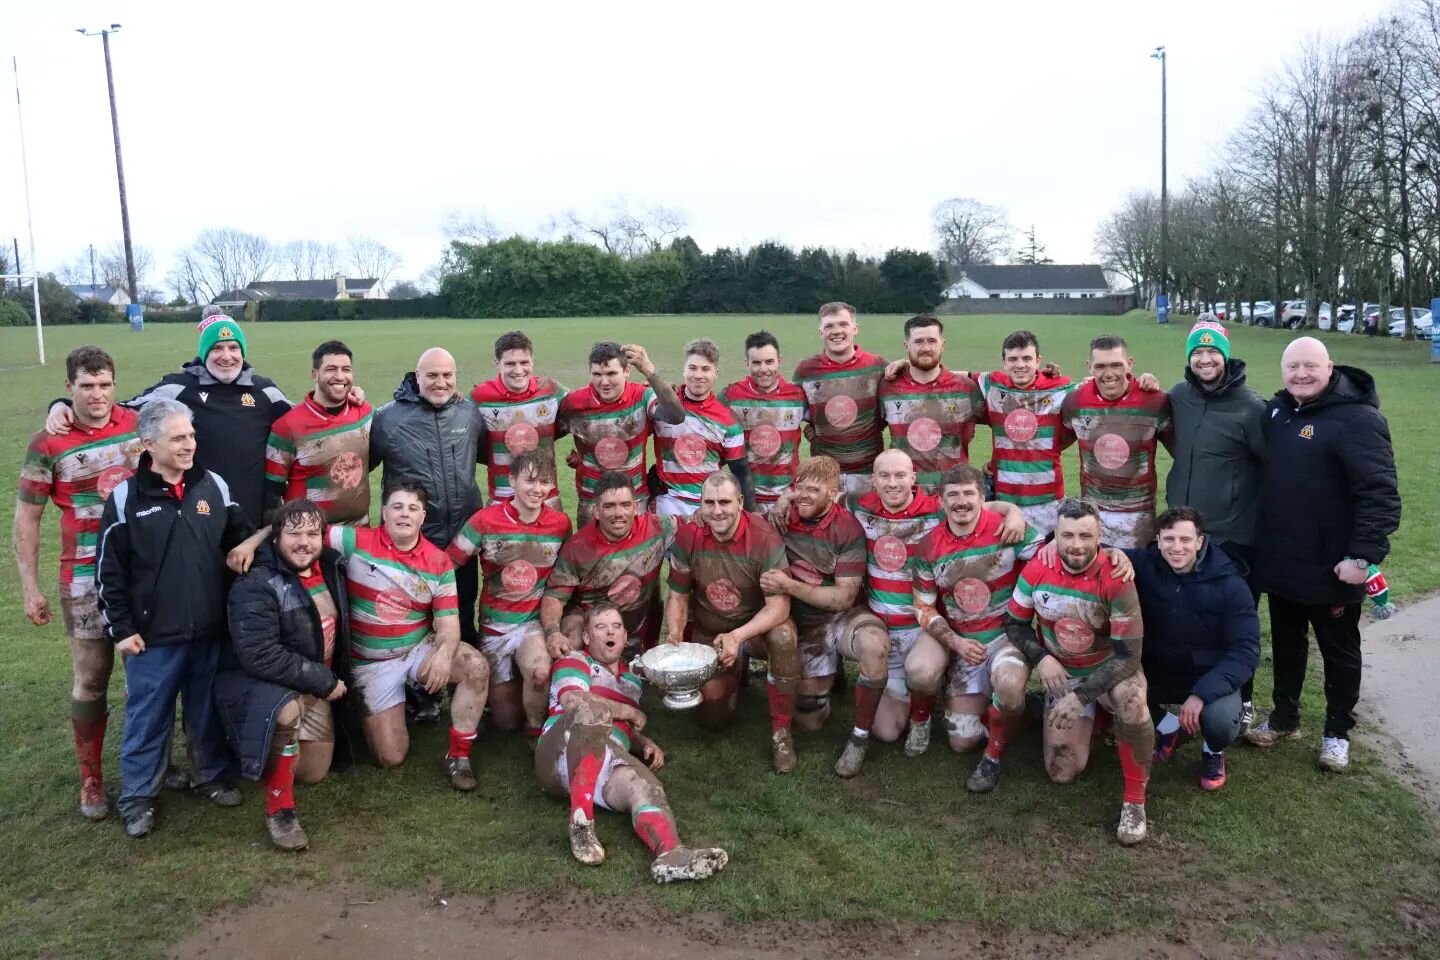 BACK TO BACK DOUBLE LEINSTER LEAGUE CHAMPIONS!!! 

Bective 1XV put the cherry on top for the last league game beating Gorey and lifting the cup. 

Final Score: Bective 1XV 28 - 12 Gorey